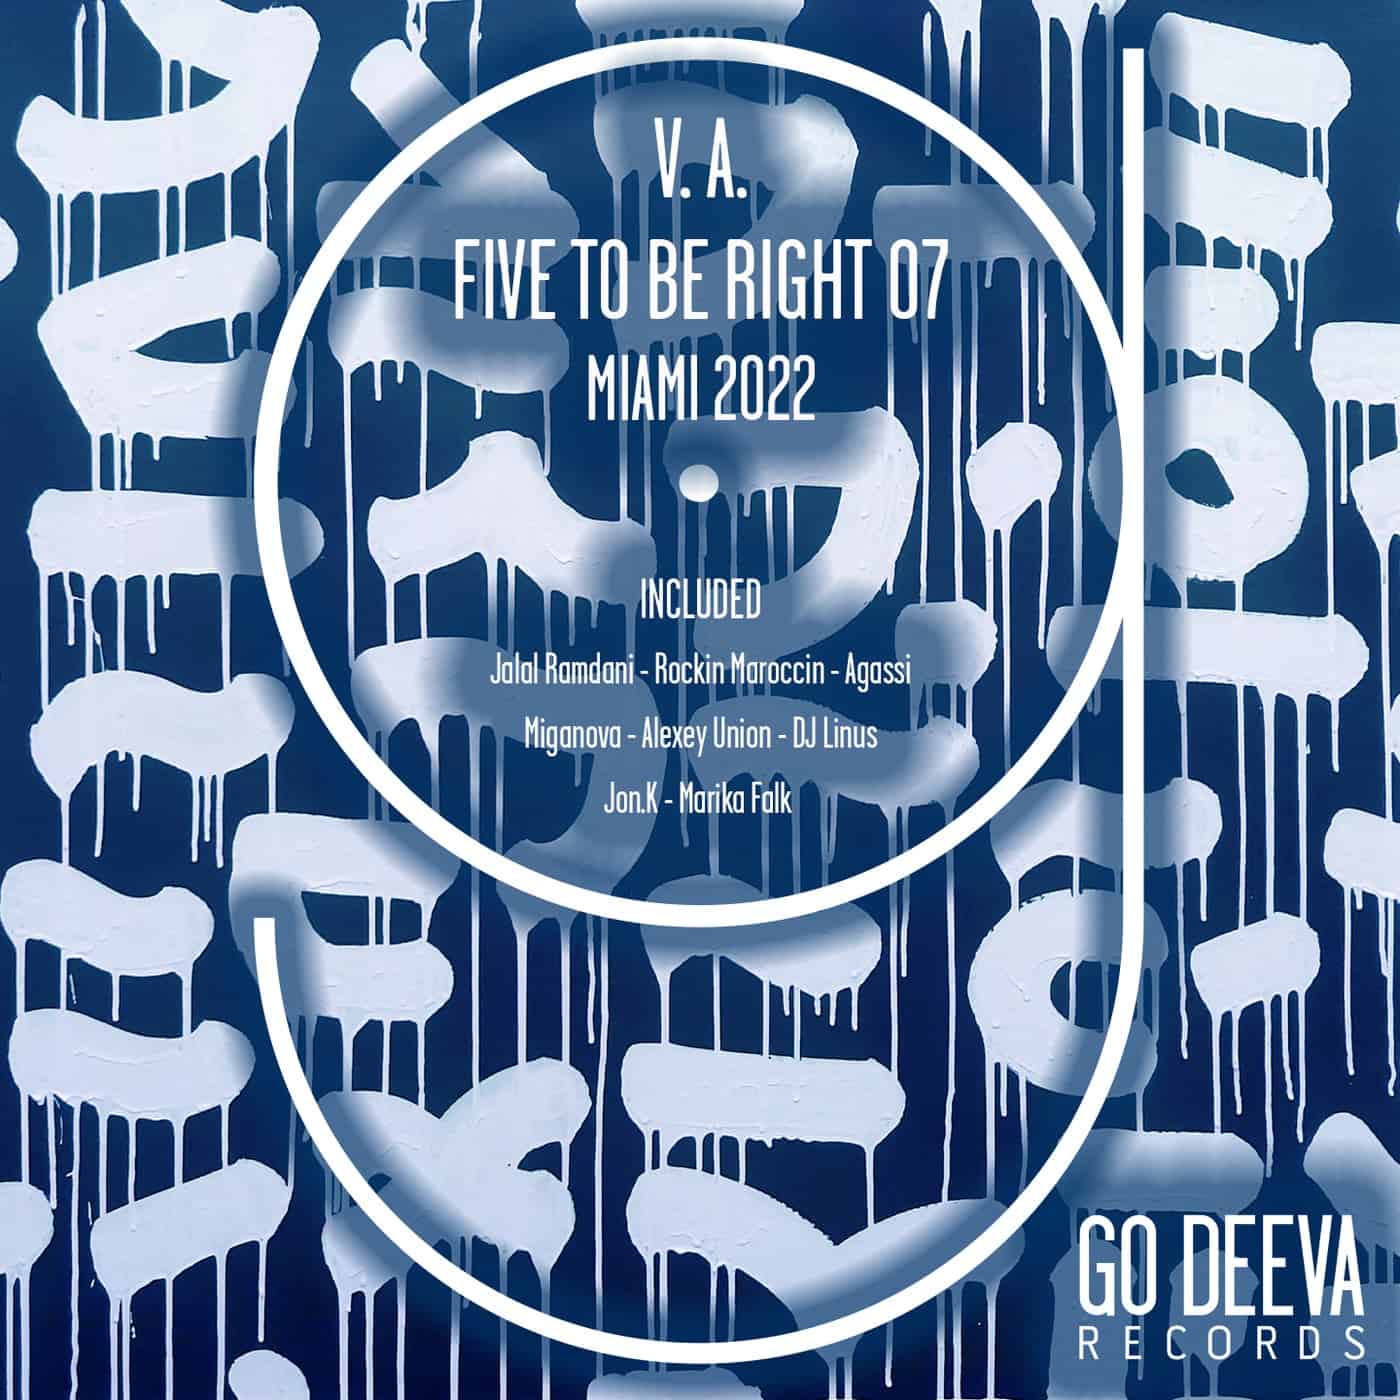 Download VA - FIVE TO BE RIGHT 07 Miami 2022 on Electrobuzz